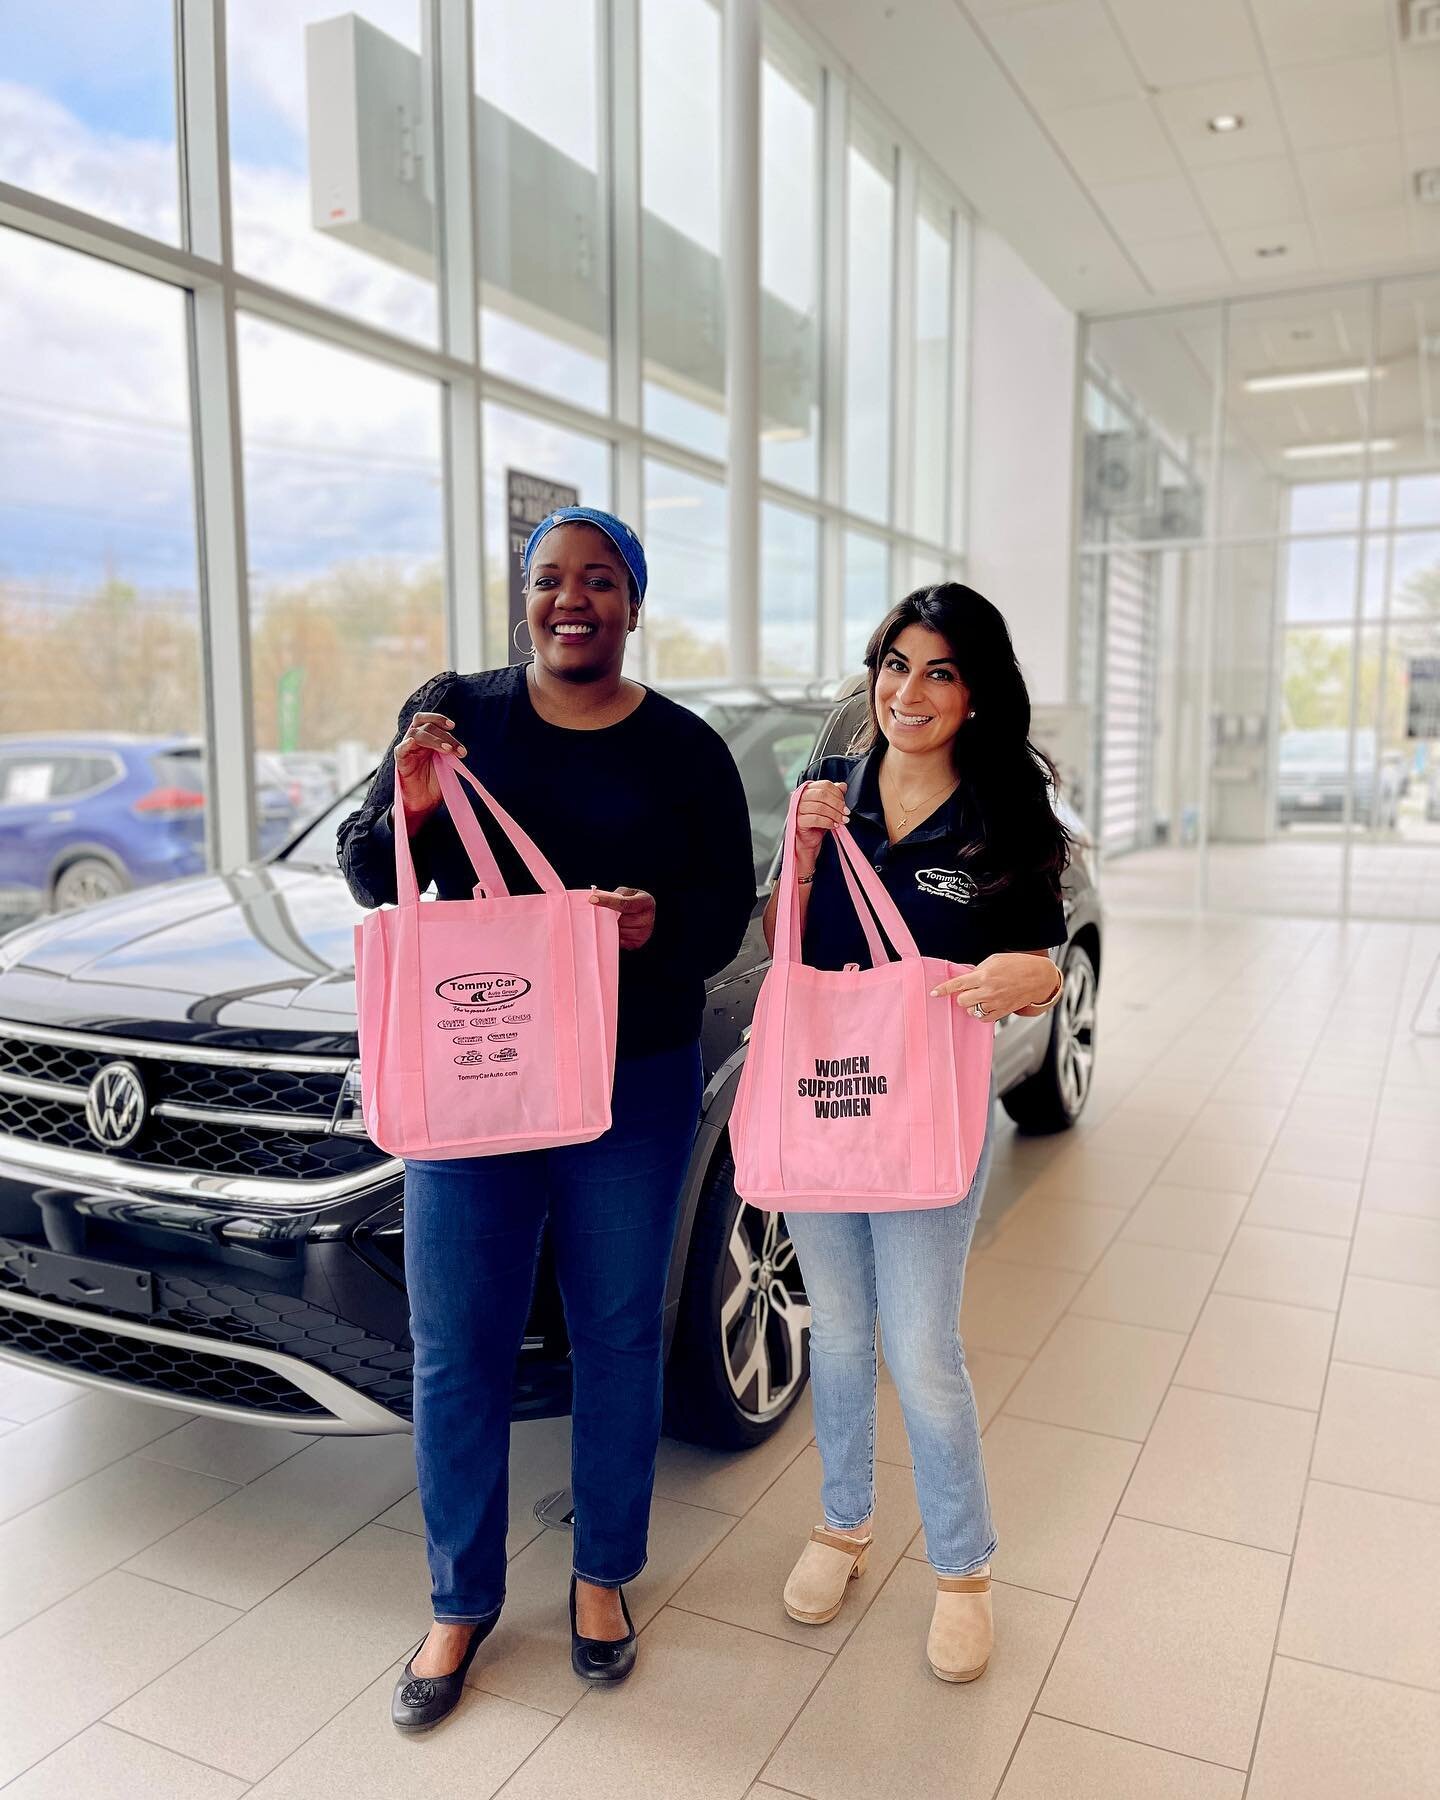 Thank you Kisha for coming all the way down to pick up our gifts to give away to all the attendees at the Women in Business Summit this Friday!💗 @wibsummit 

I can&rsquo;t wait to be a speaker and to listen to everyone share their incredible stories